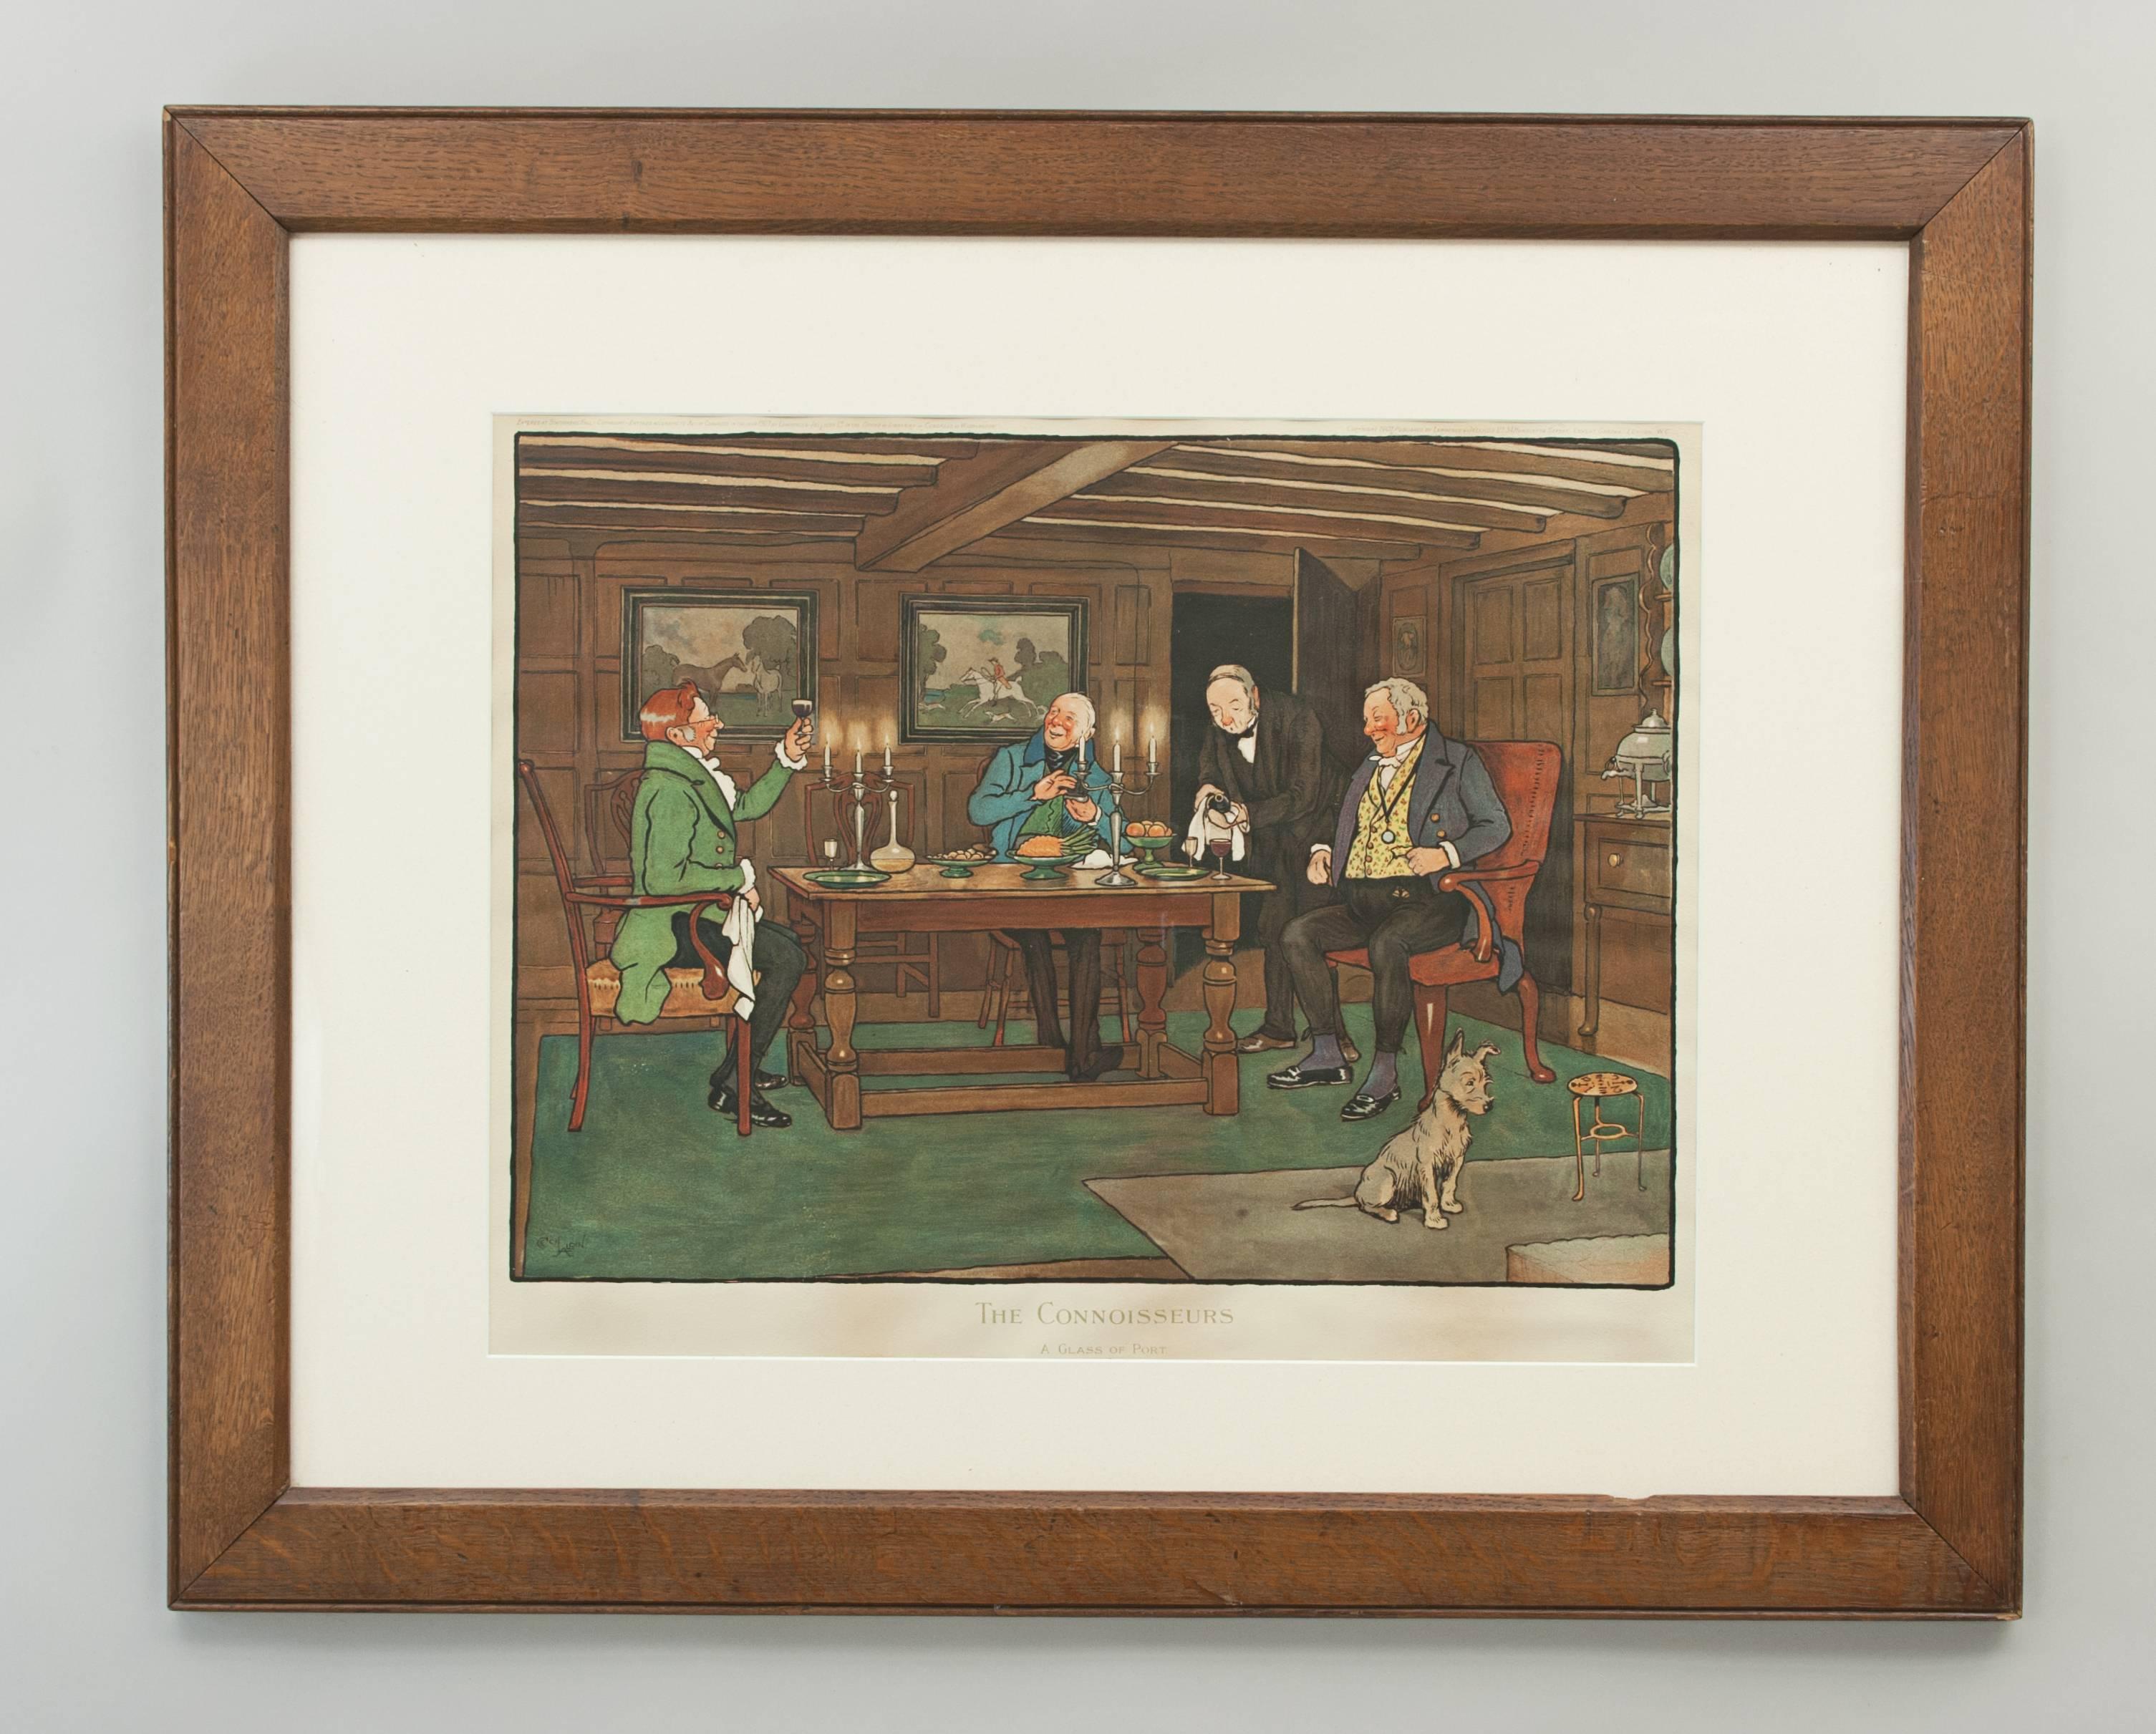 Drinking print by Cecil Aldin.
A framed colourful chromolithographic print after Cecil Aldin entitled: The Connoisseurs, A Glass Of Port. Published by Lawrence and Jellicoe Ltd., 34 Henrietta Street, Covent Garden, London. The print depicts three